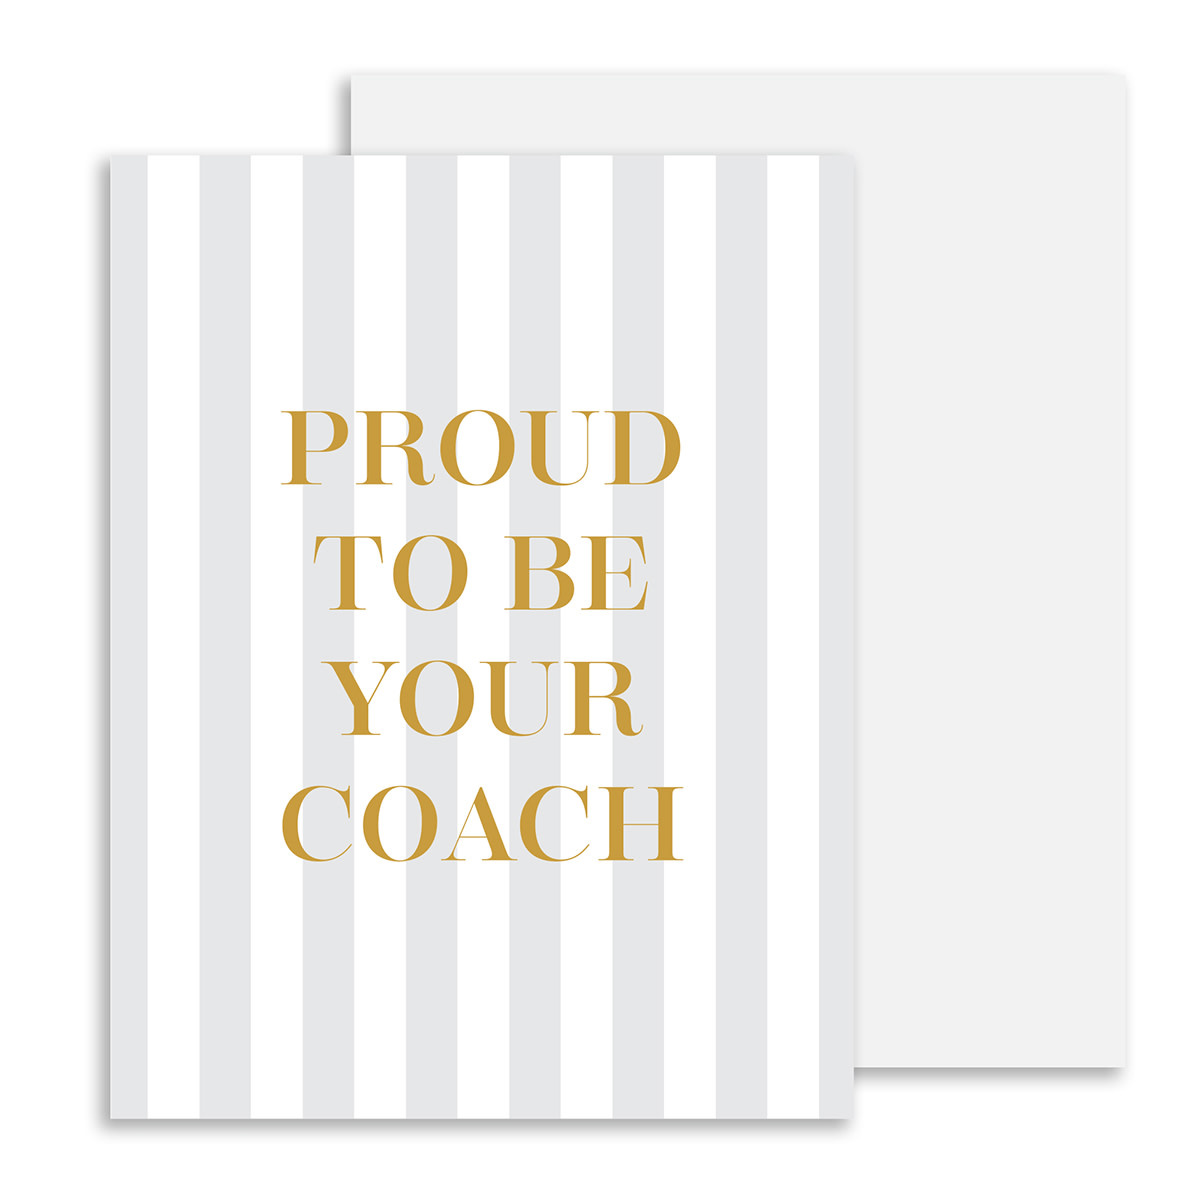 Gus and Ruby Letterpress - GR GR NSMI - Proud to be your Coach Boxed Note Set, Set of 8